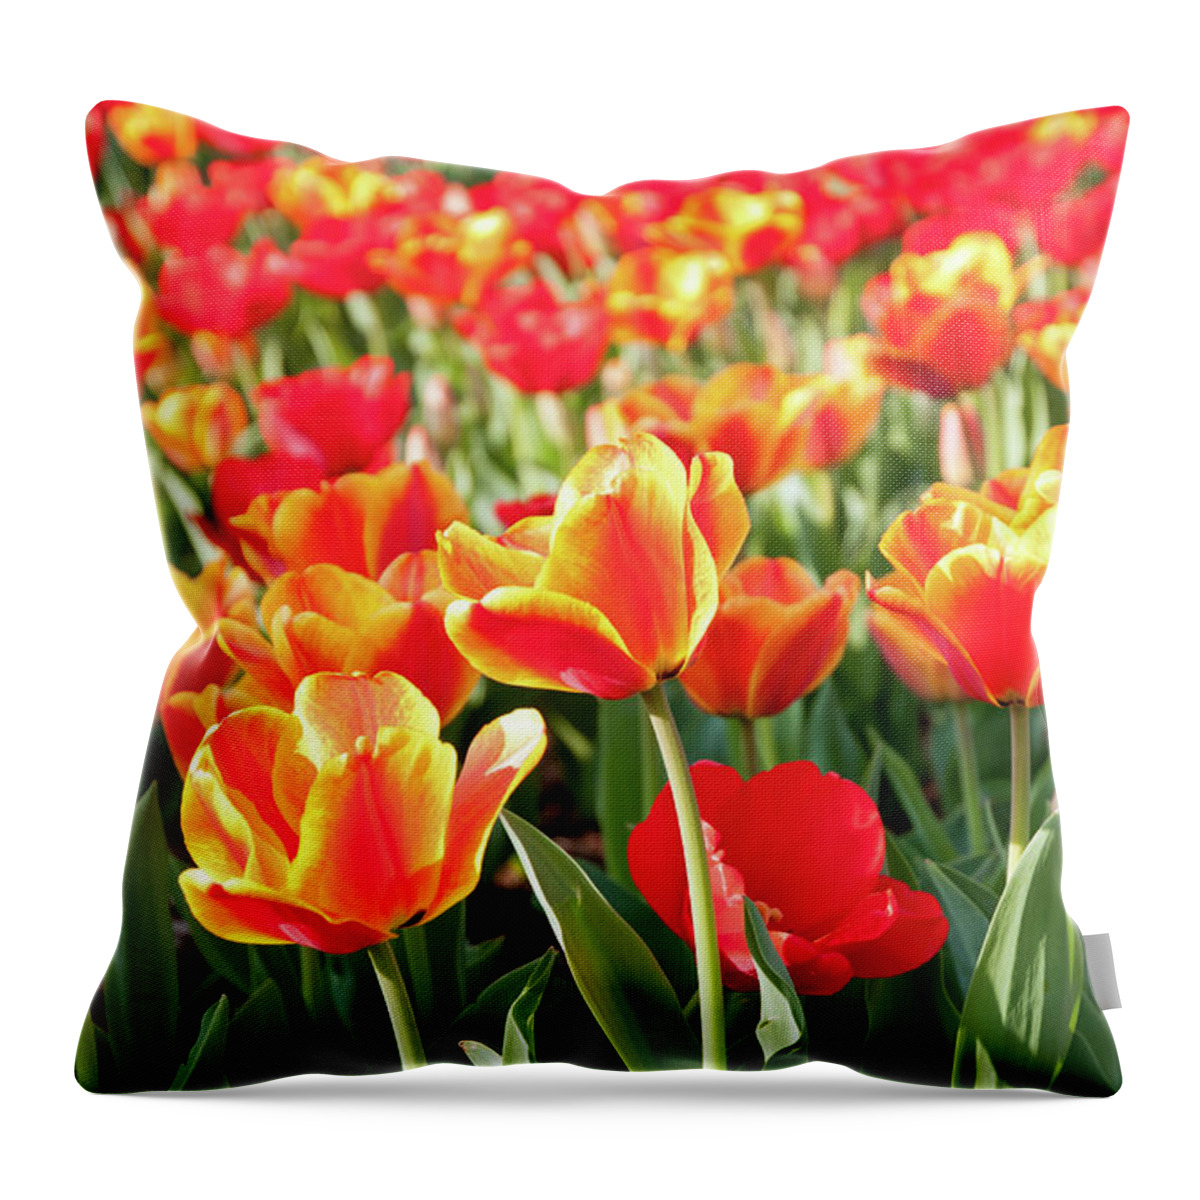 Orange Color Throw Pillow featuring the photograph Sea Of Red And Orange Tulips - Full by Travelif